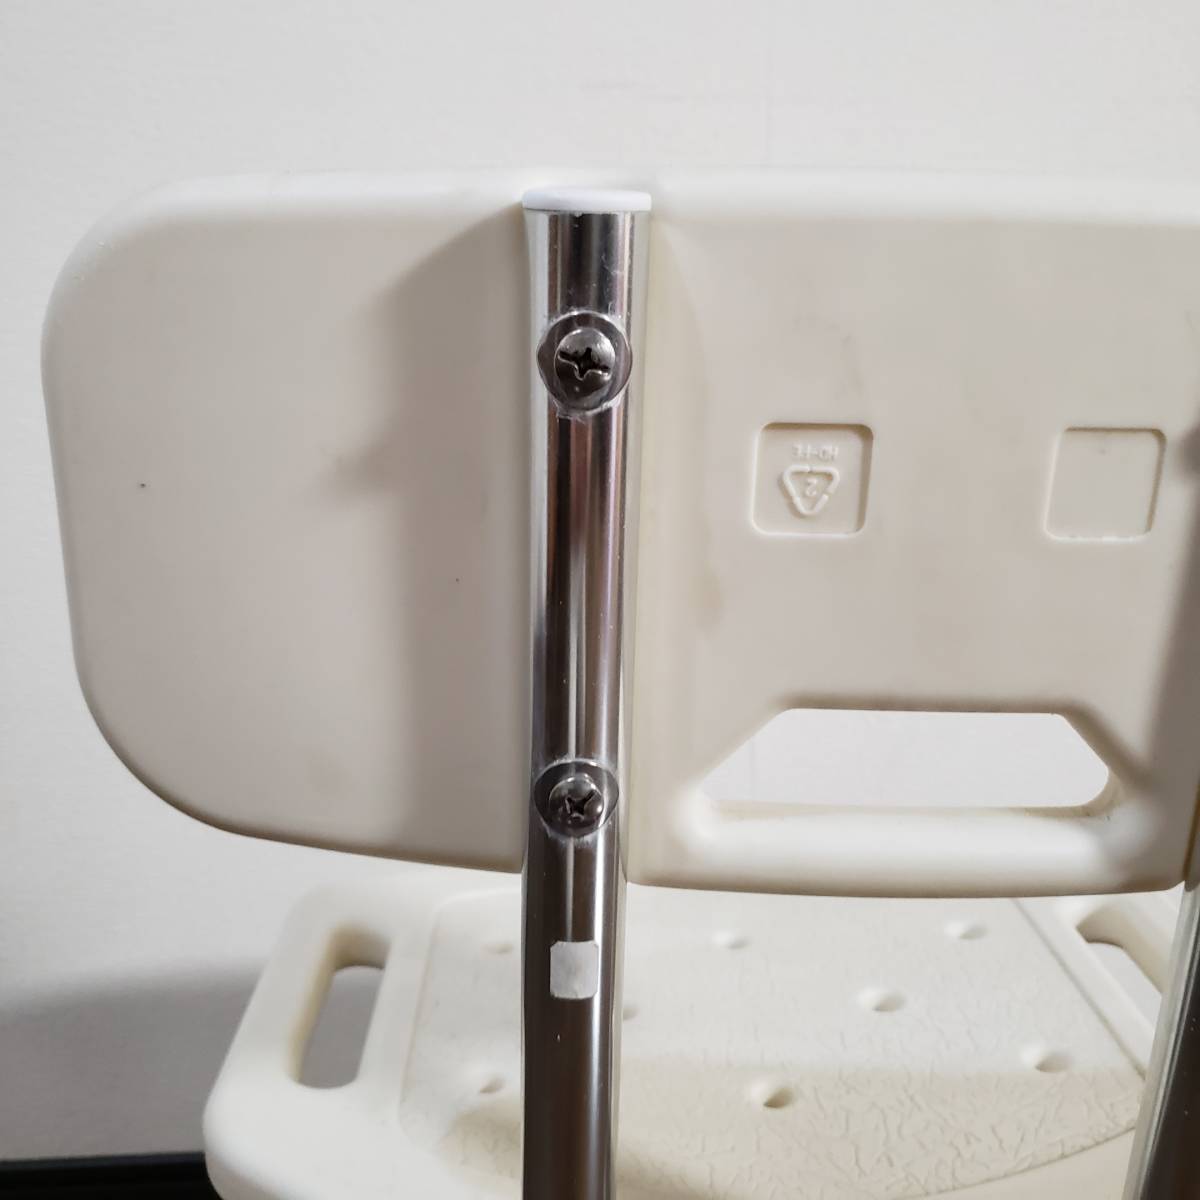 G-355 shower chair - aluminium . attaching nursing for bathing for 7 -step attaching slipping difficult packing size 100cm